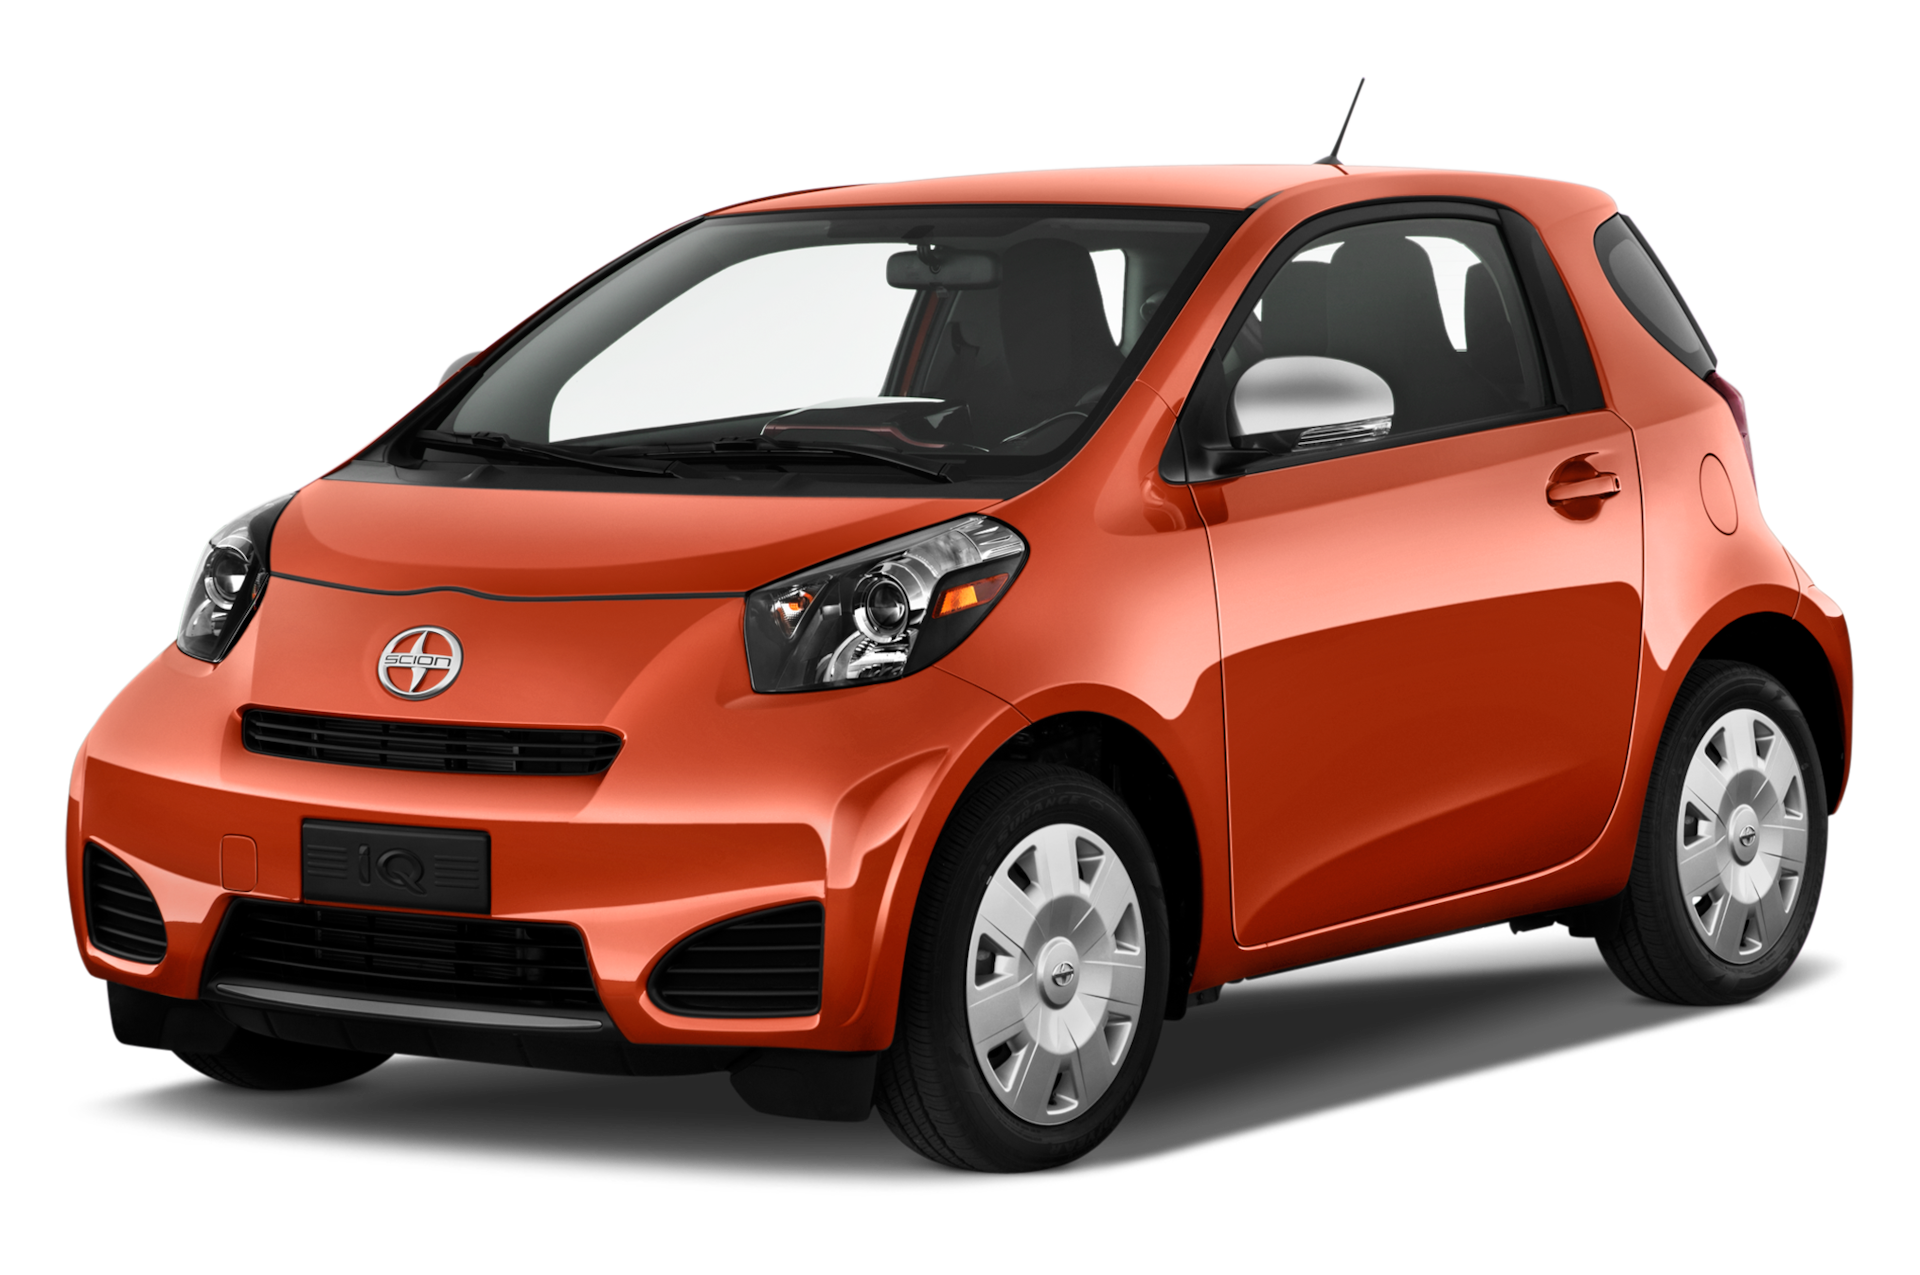 2013 Scion IQ Prices, Reviews, and Photos - MotorTrend